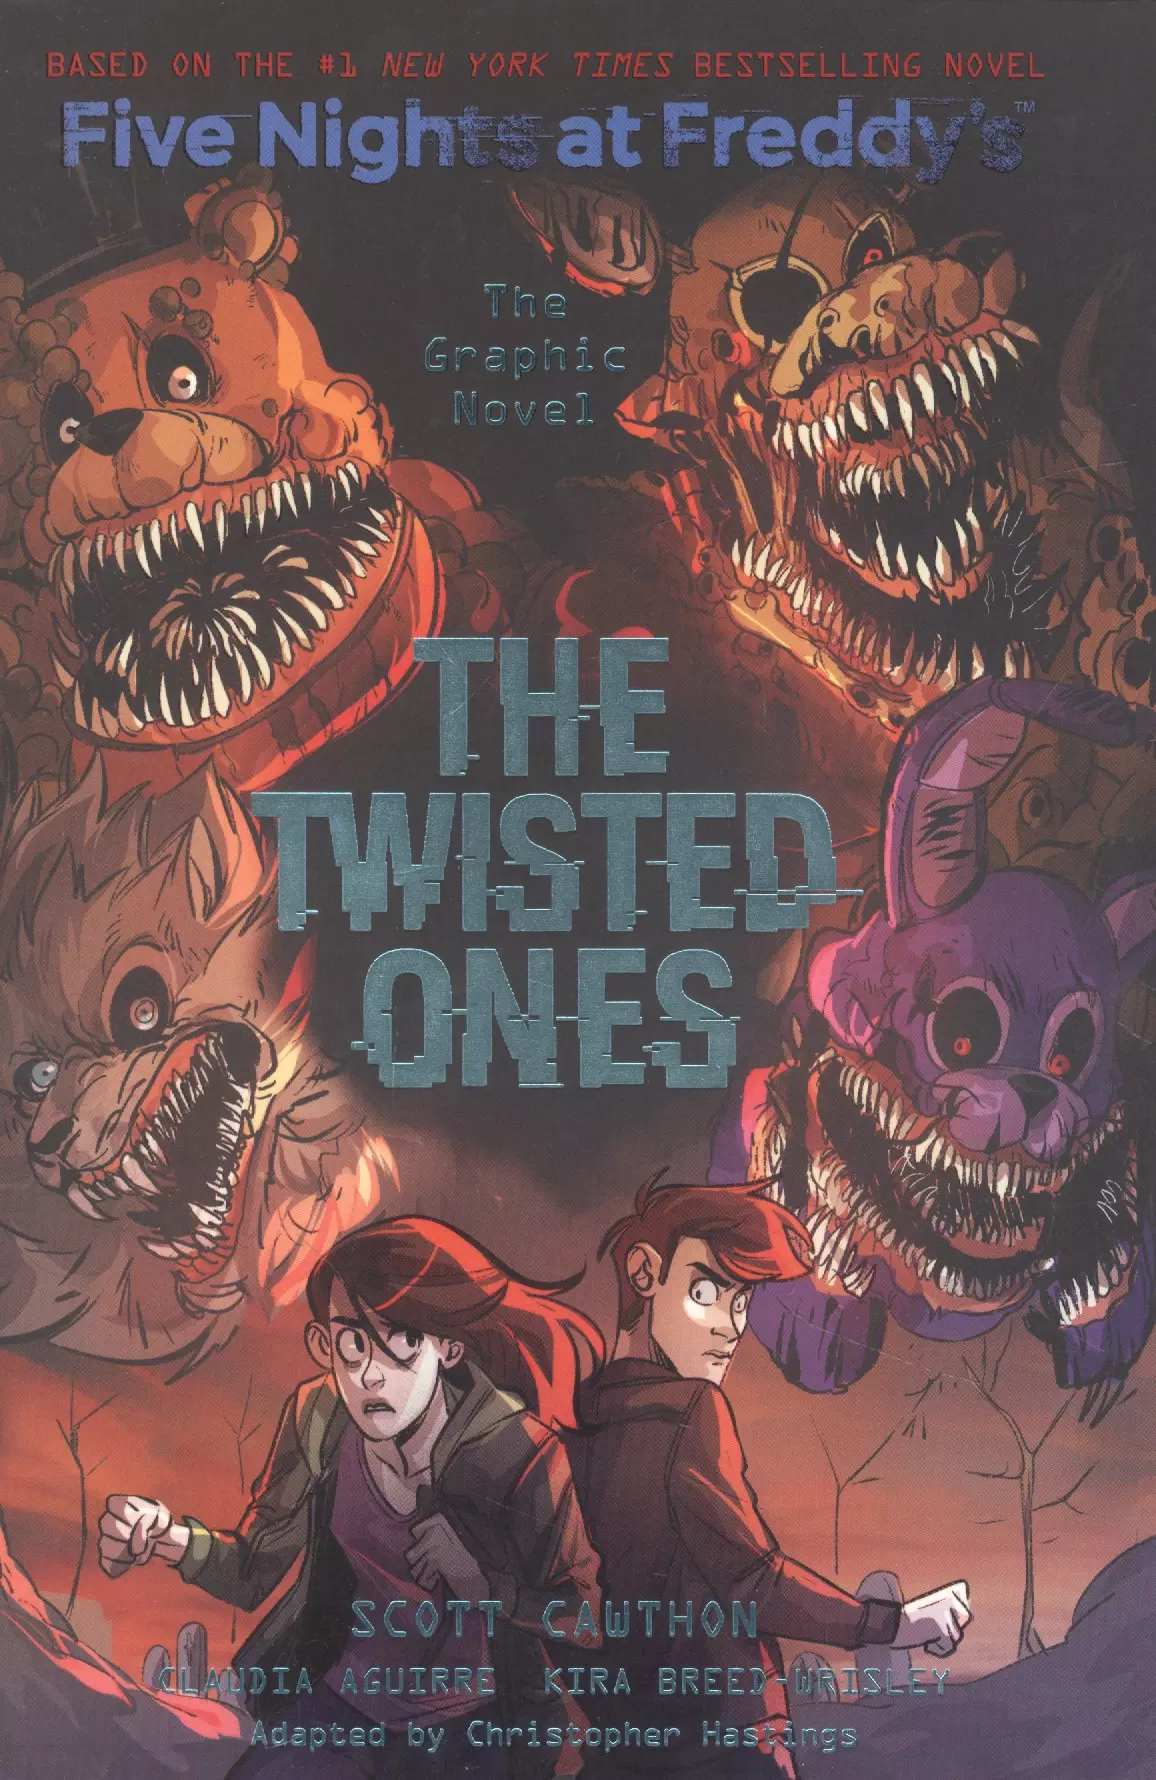 The Twisted Ones (Five Nights at Freddys Graphic Novel 2) cawthon scott cooper elley into the pit